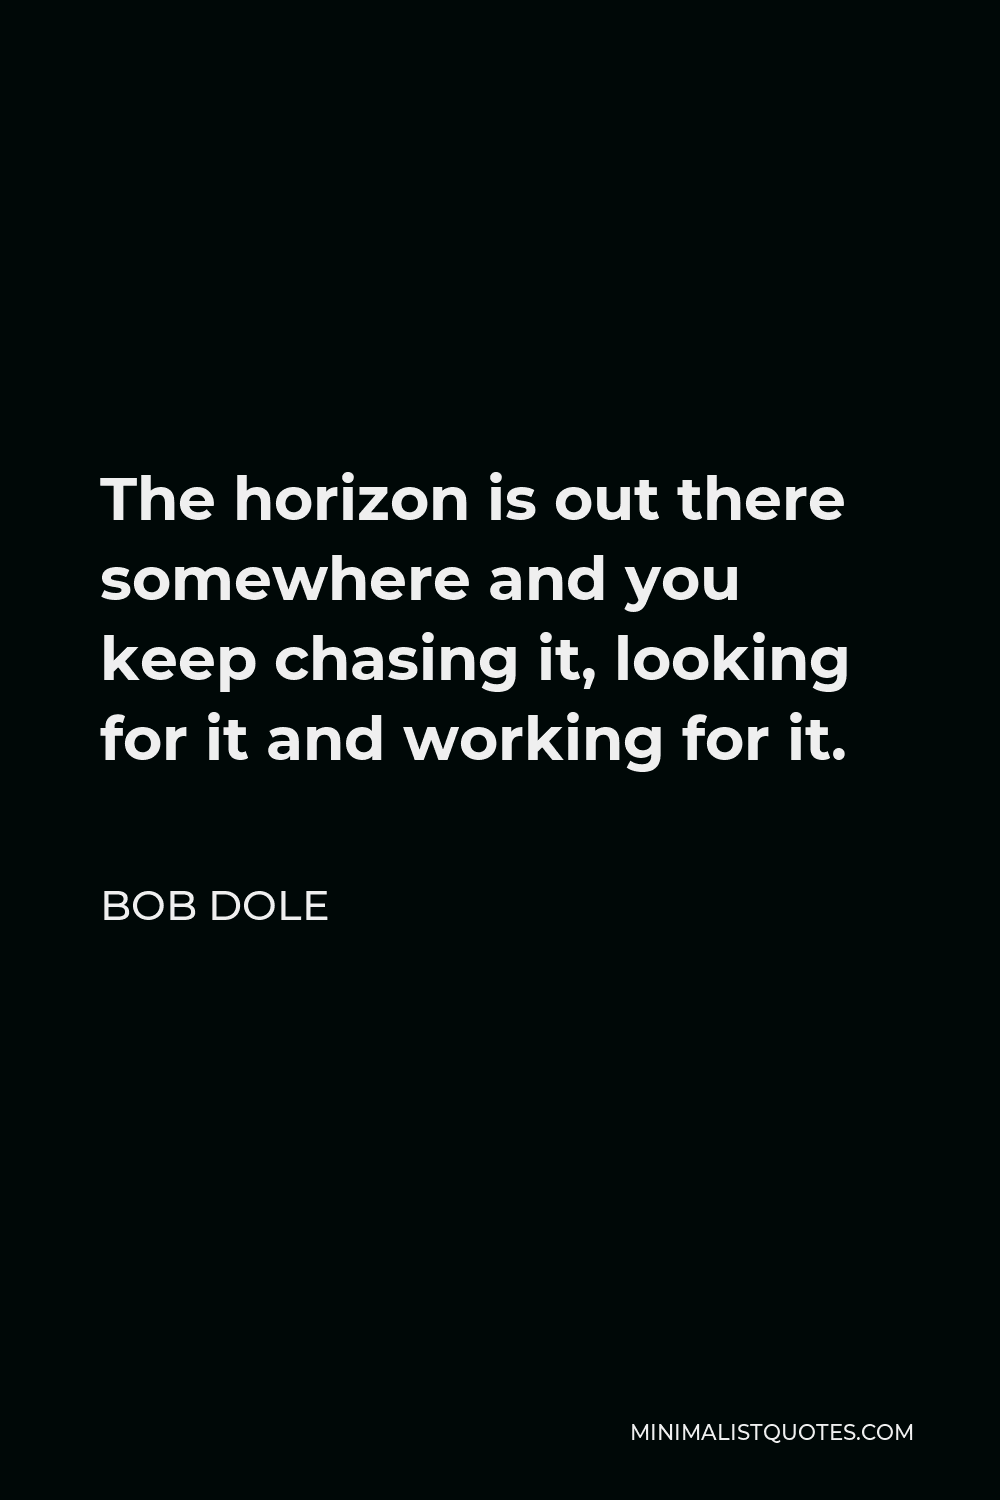 Bob Dole Quote - The horizon is out there somewhere and you keep chasing it, looking for it and working for it.